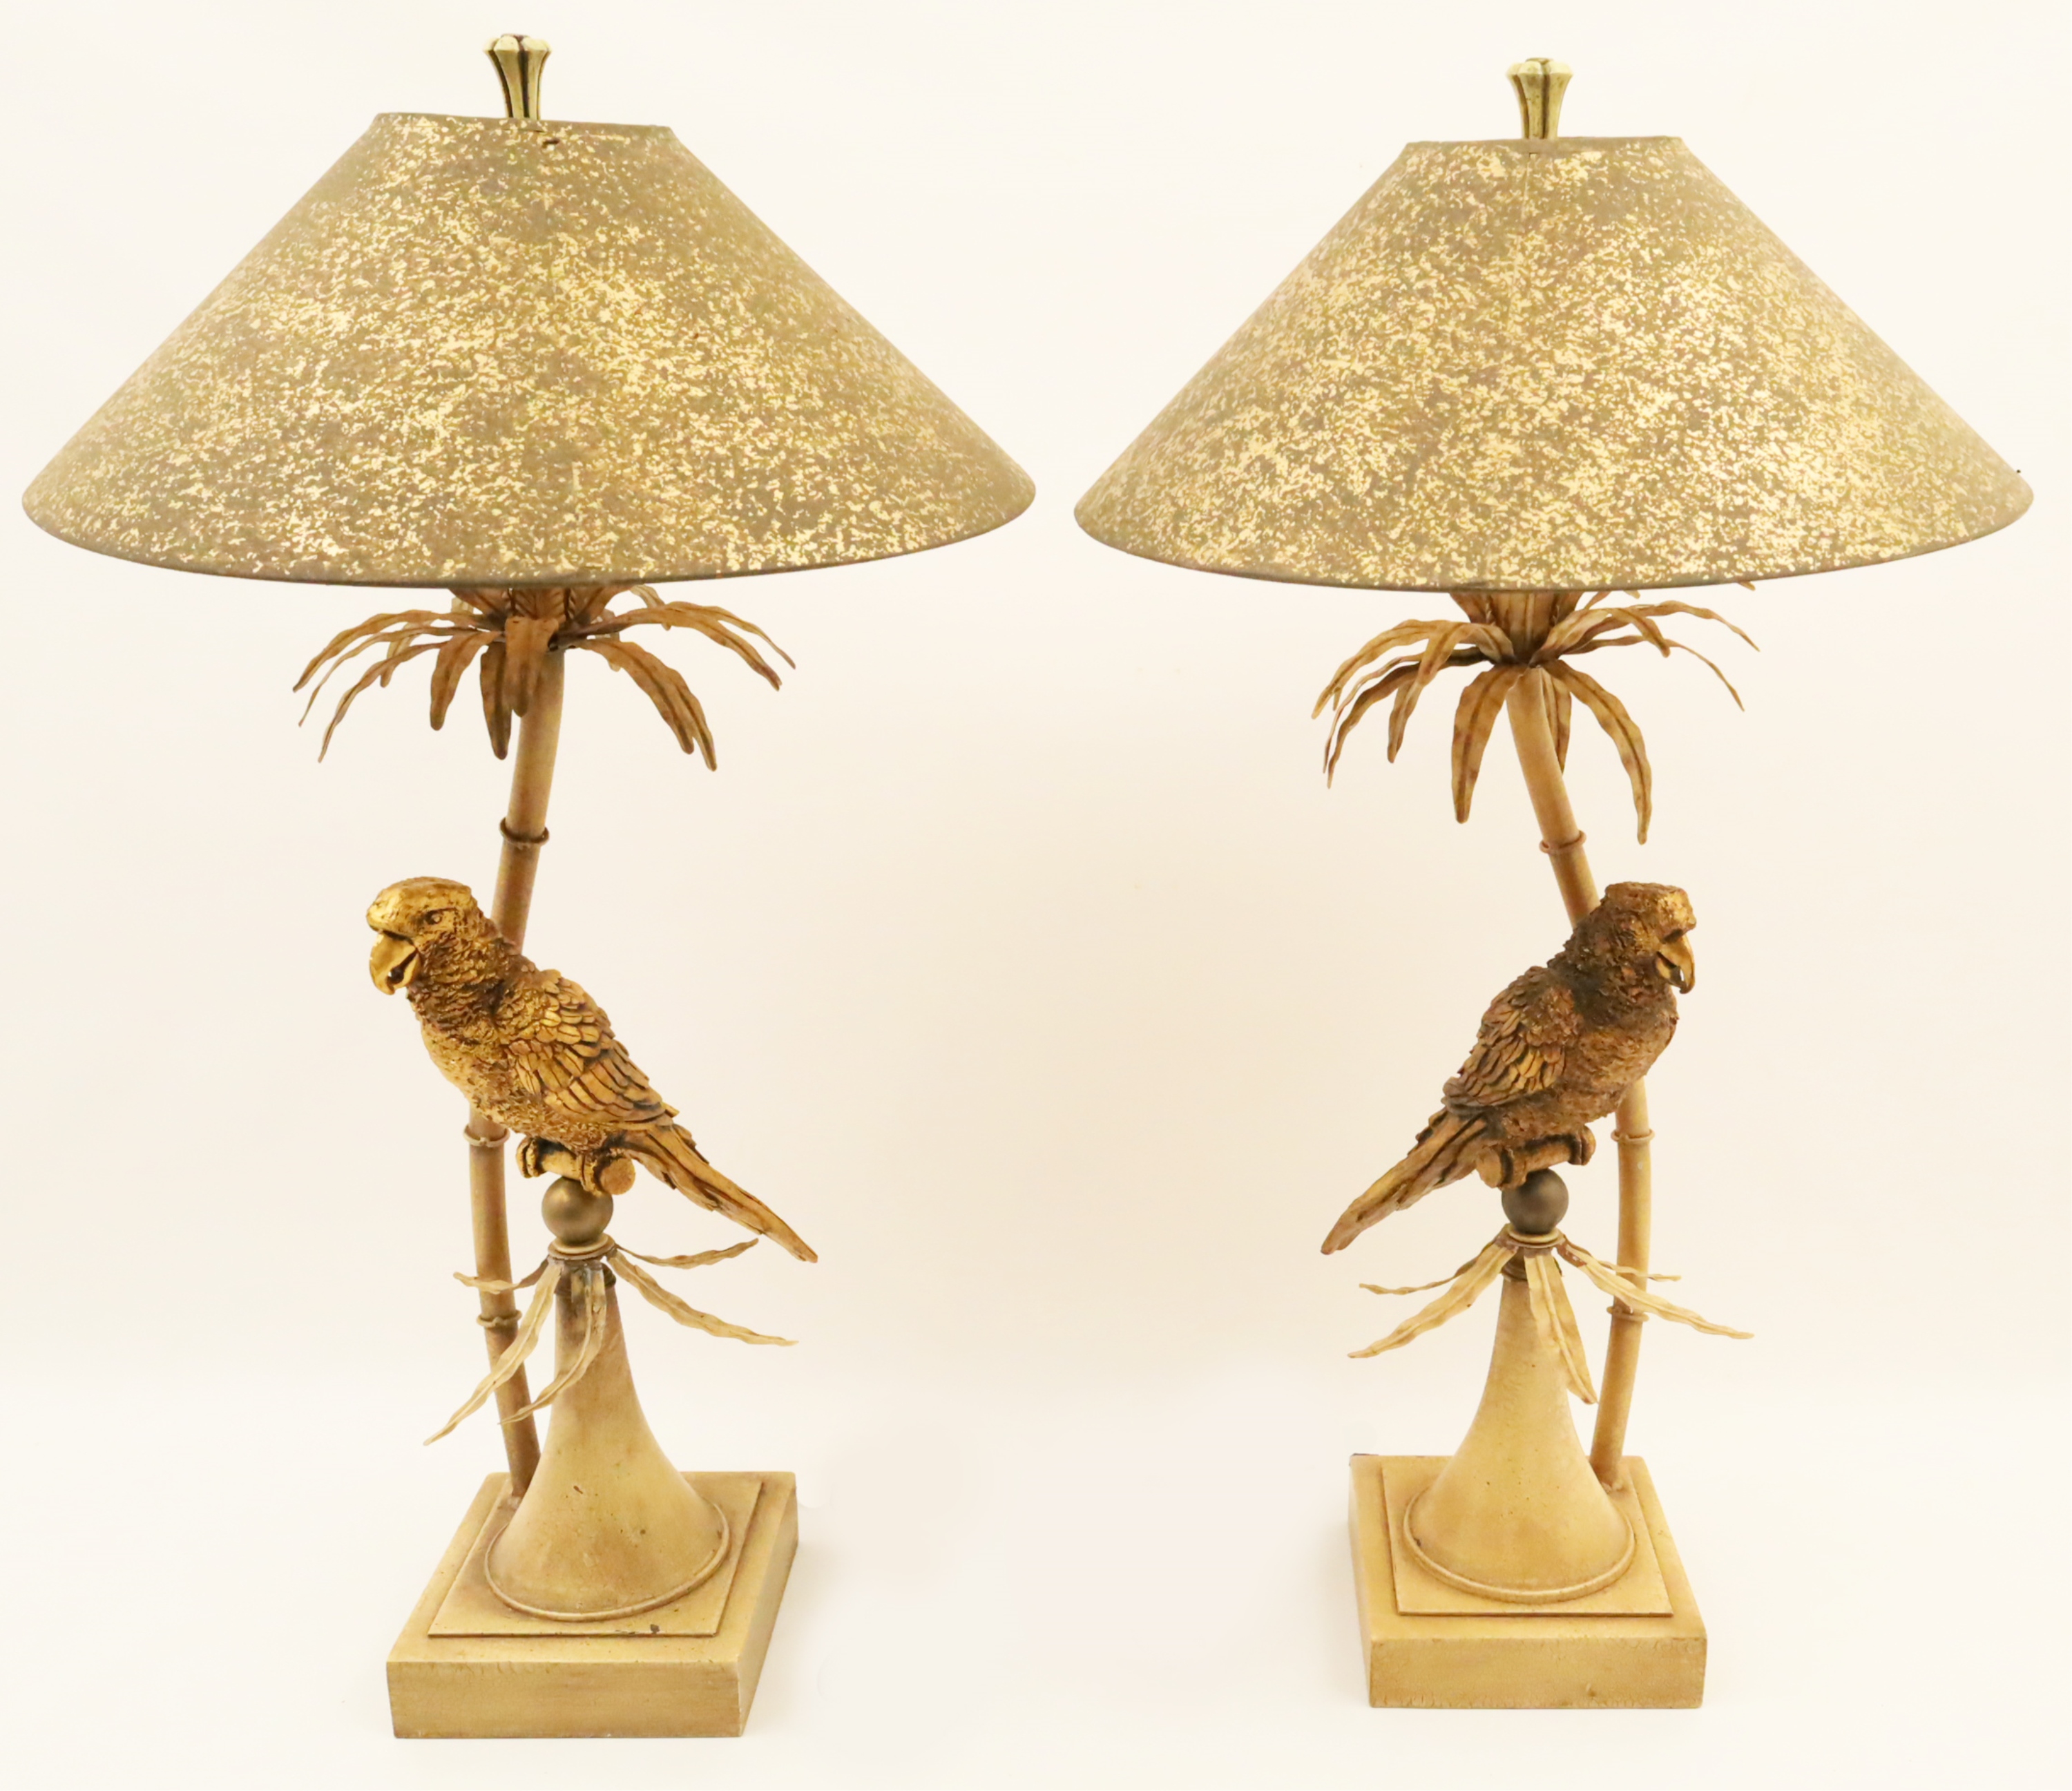 PAIR OF DECORATIVE PARROT MOUNTED